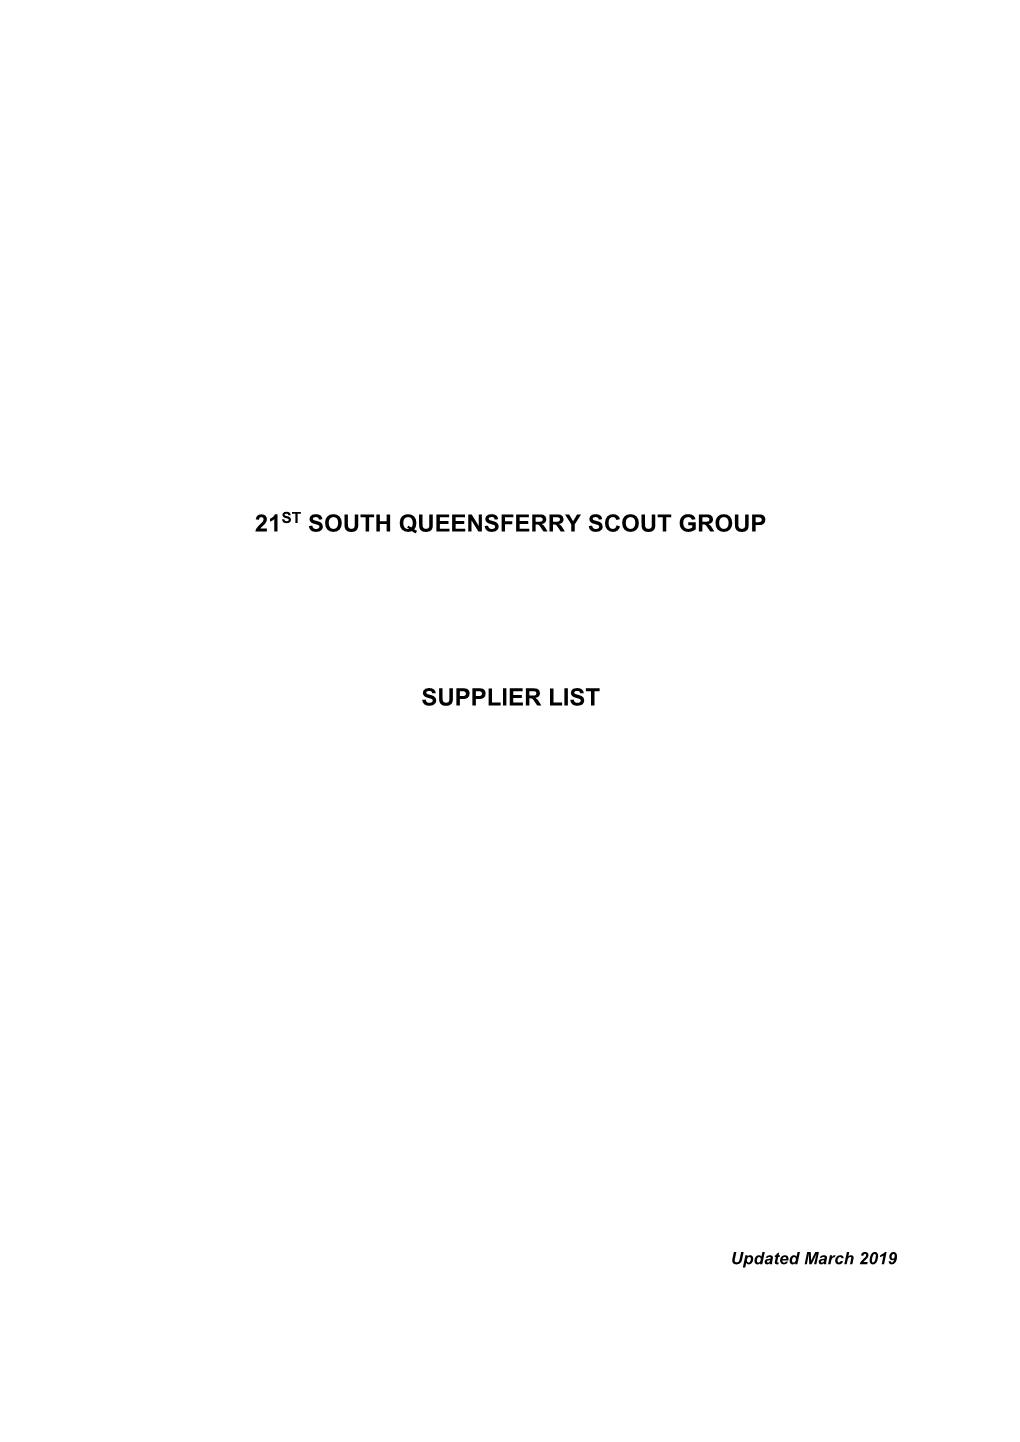 21St South Queensferry Scout Group Supplier List